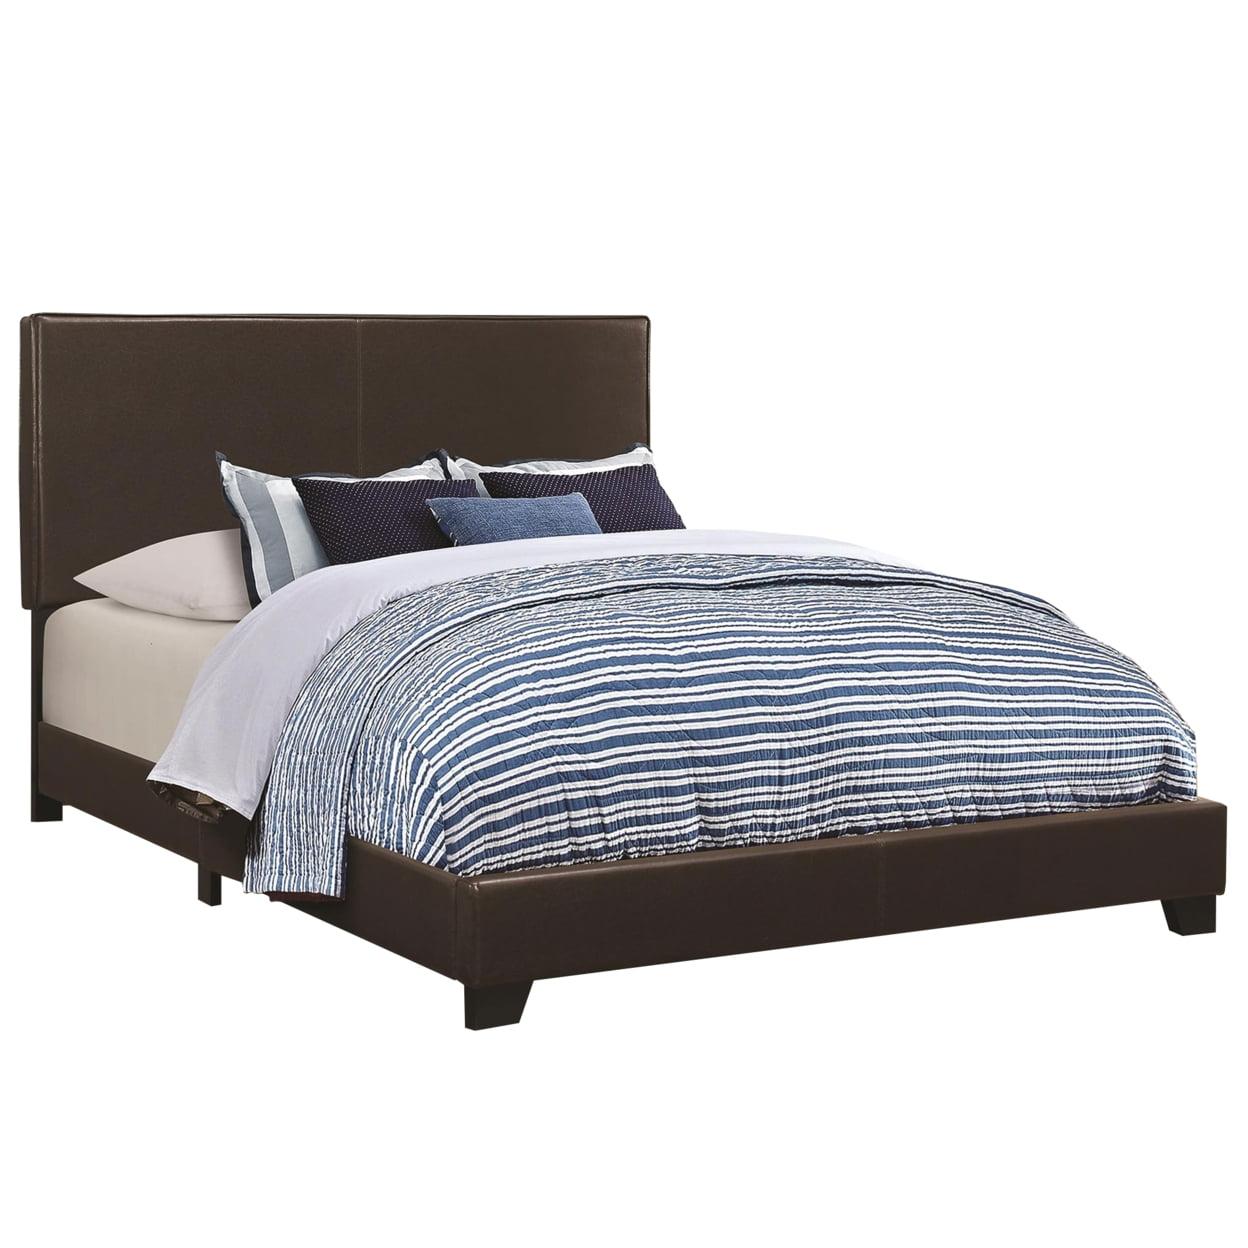 Modern Sleek Queen Upholstered Bed with Faux Leather Headboard, Brown